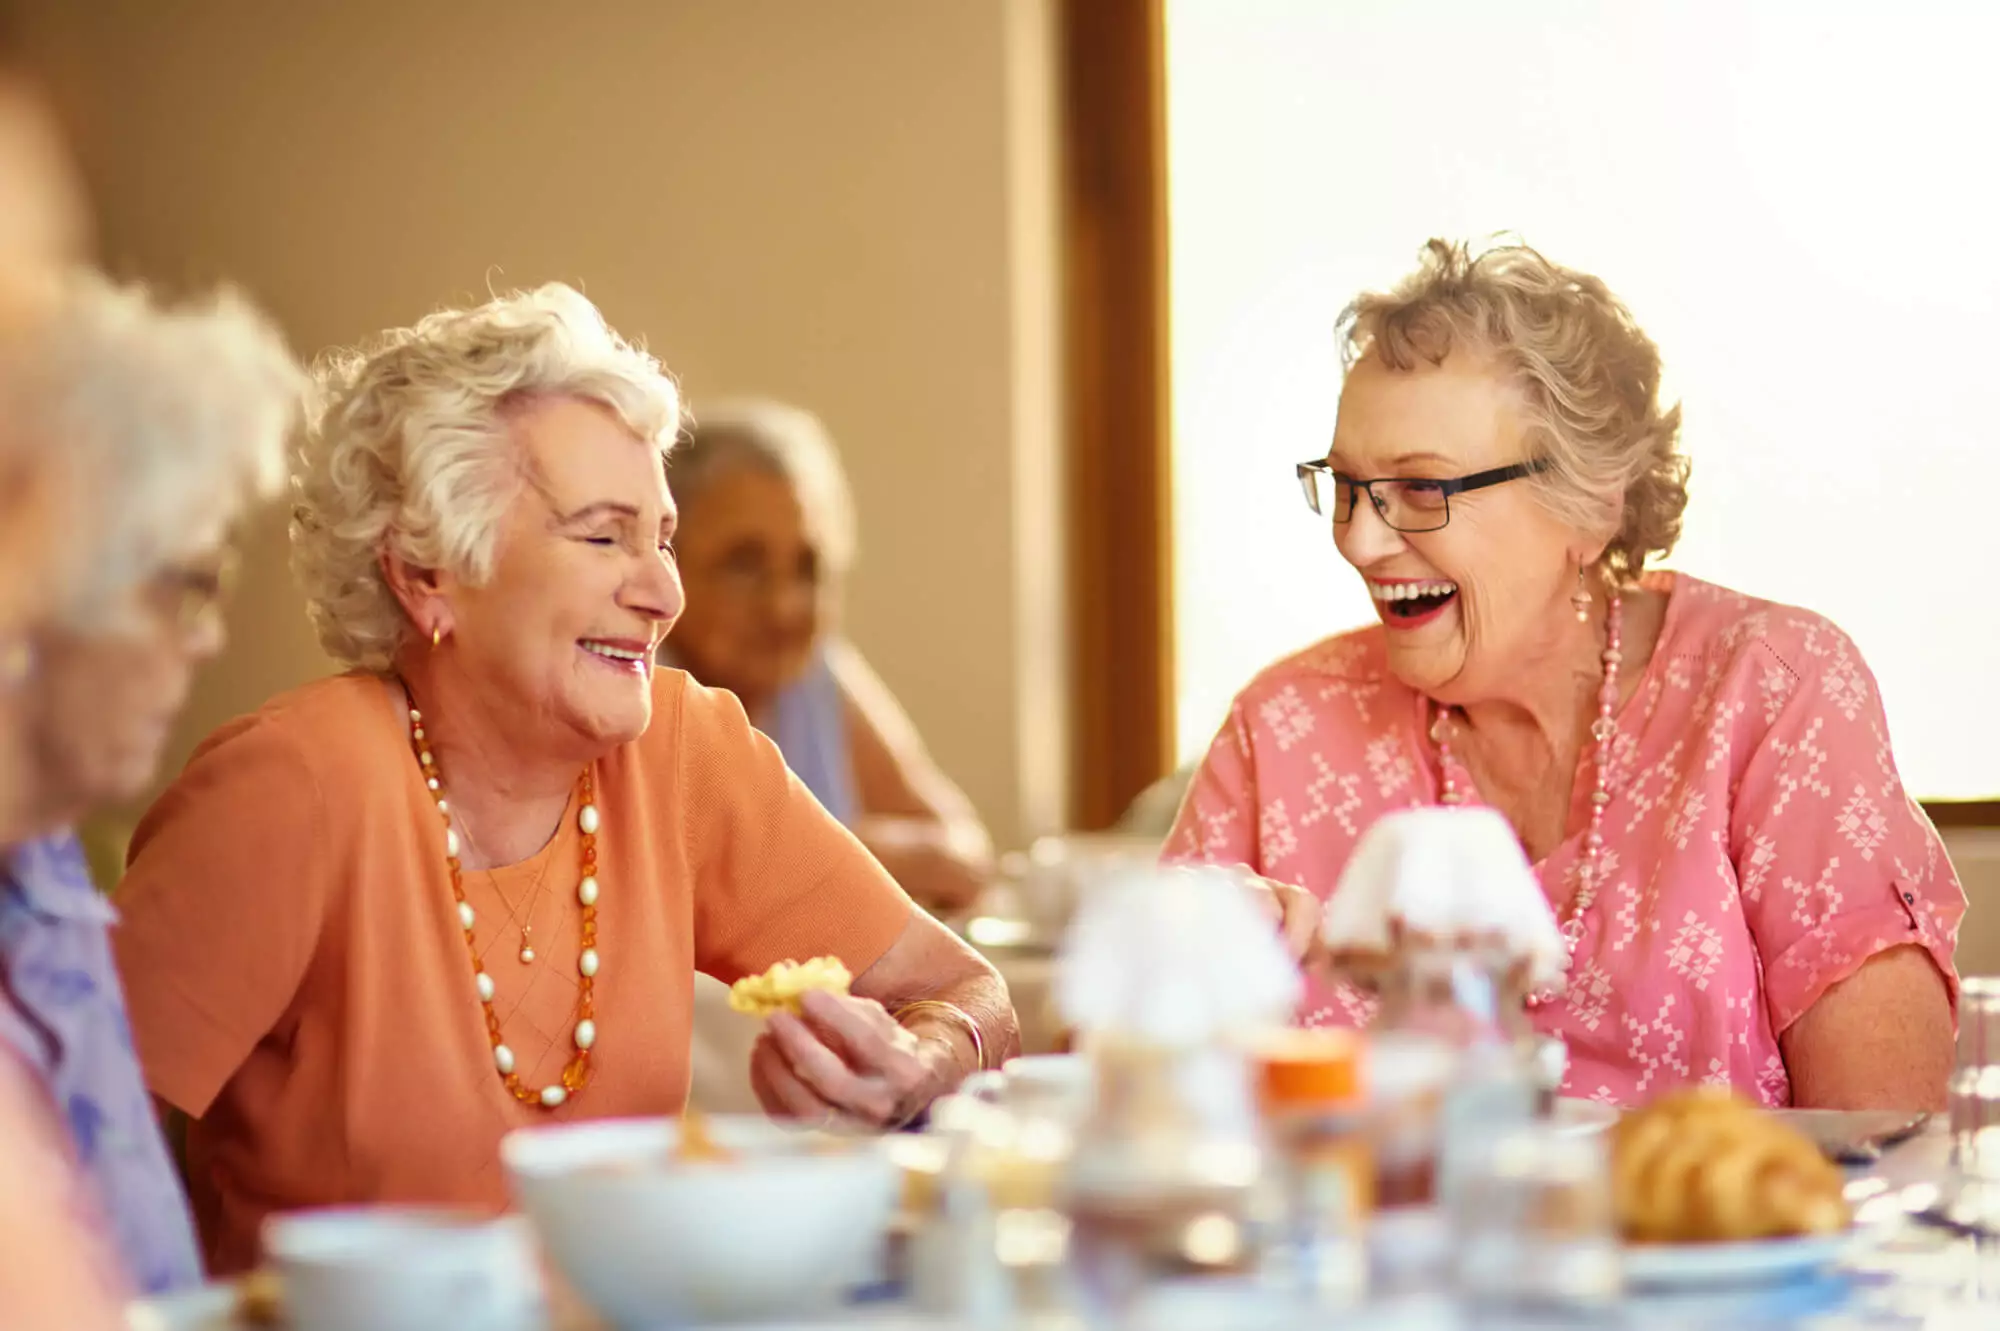 Two older women, in orange and pink, eating and laughing together